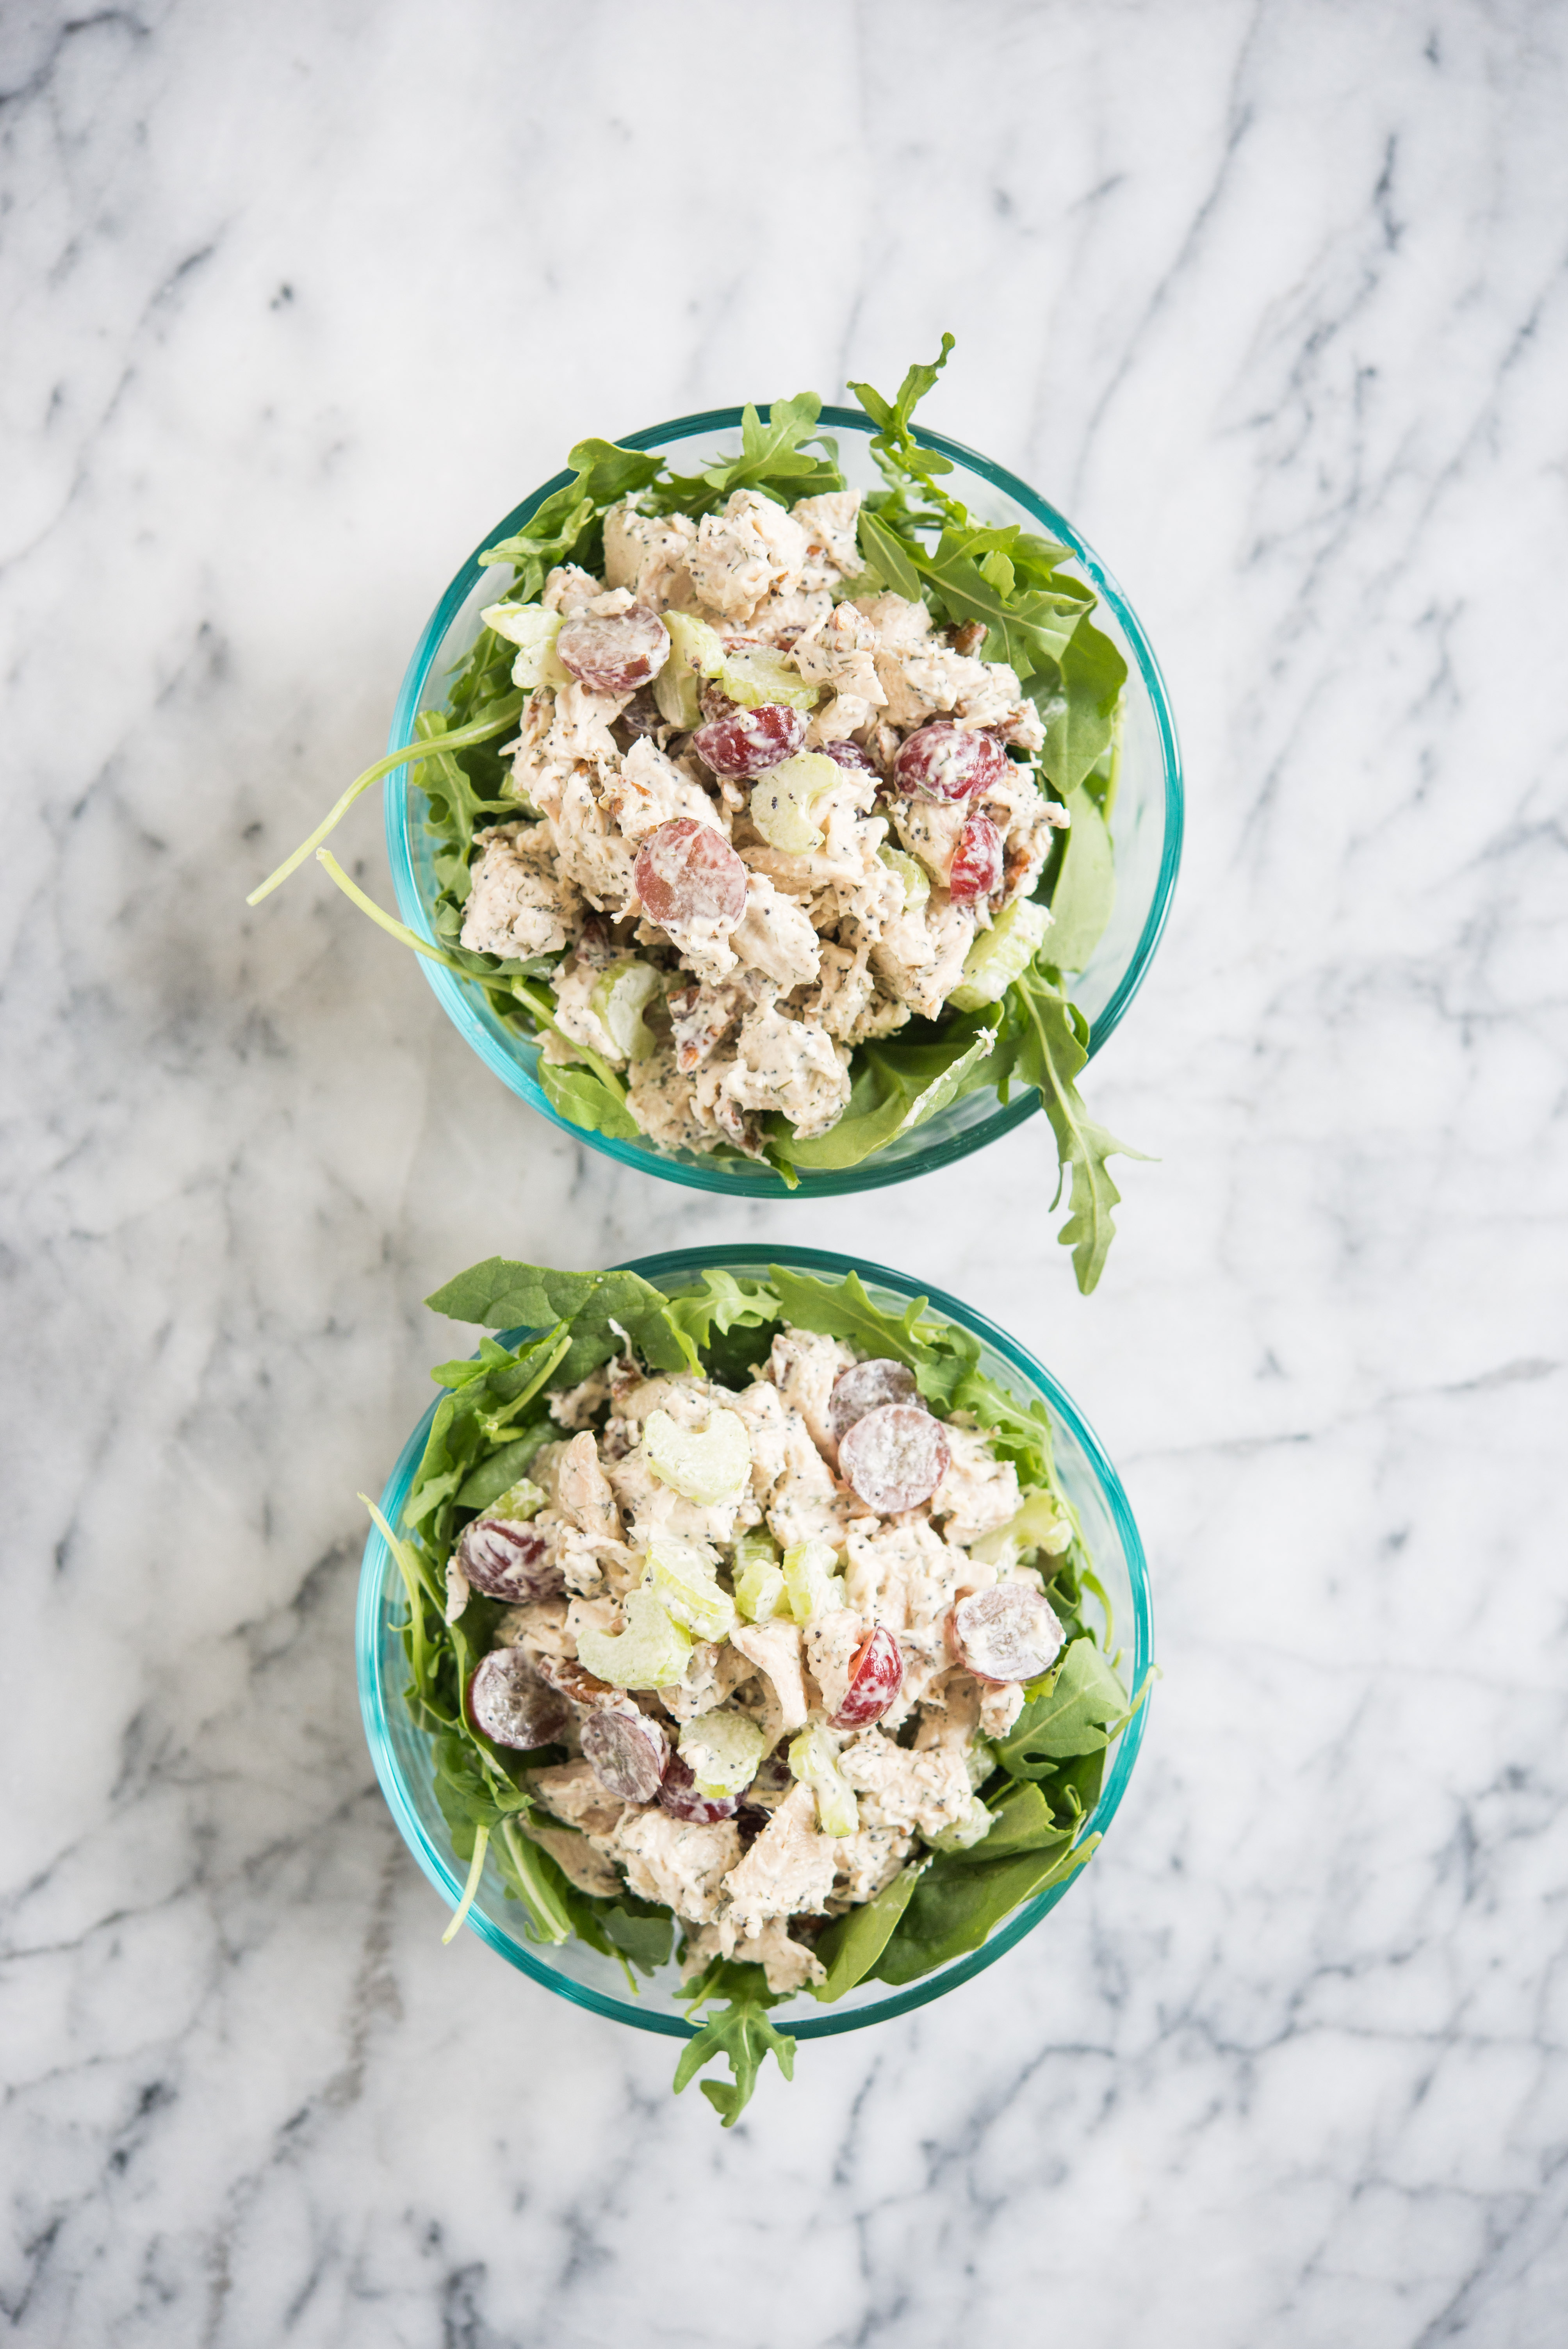 two glass bowls filled with greens topped with chicken salad with grapes and pecans